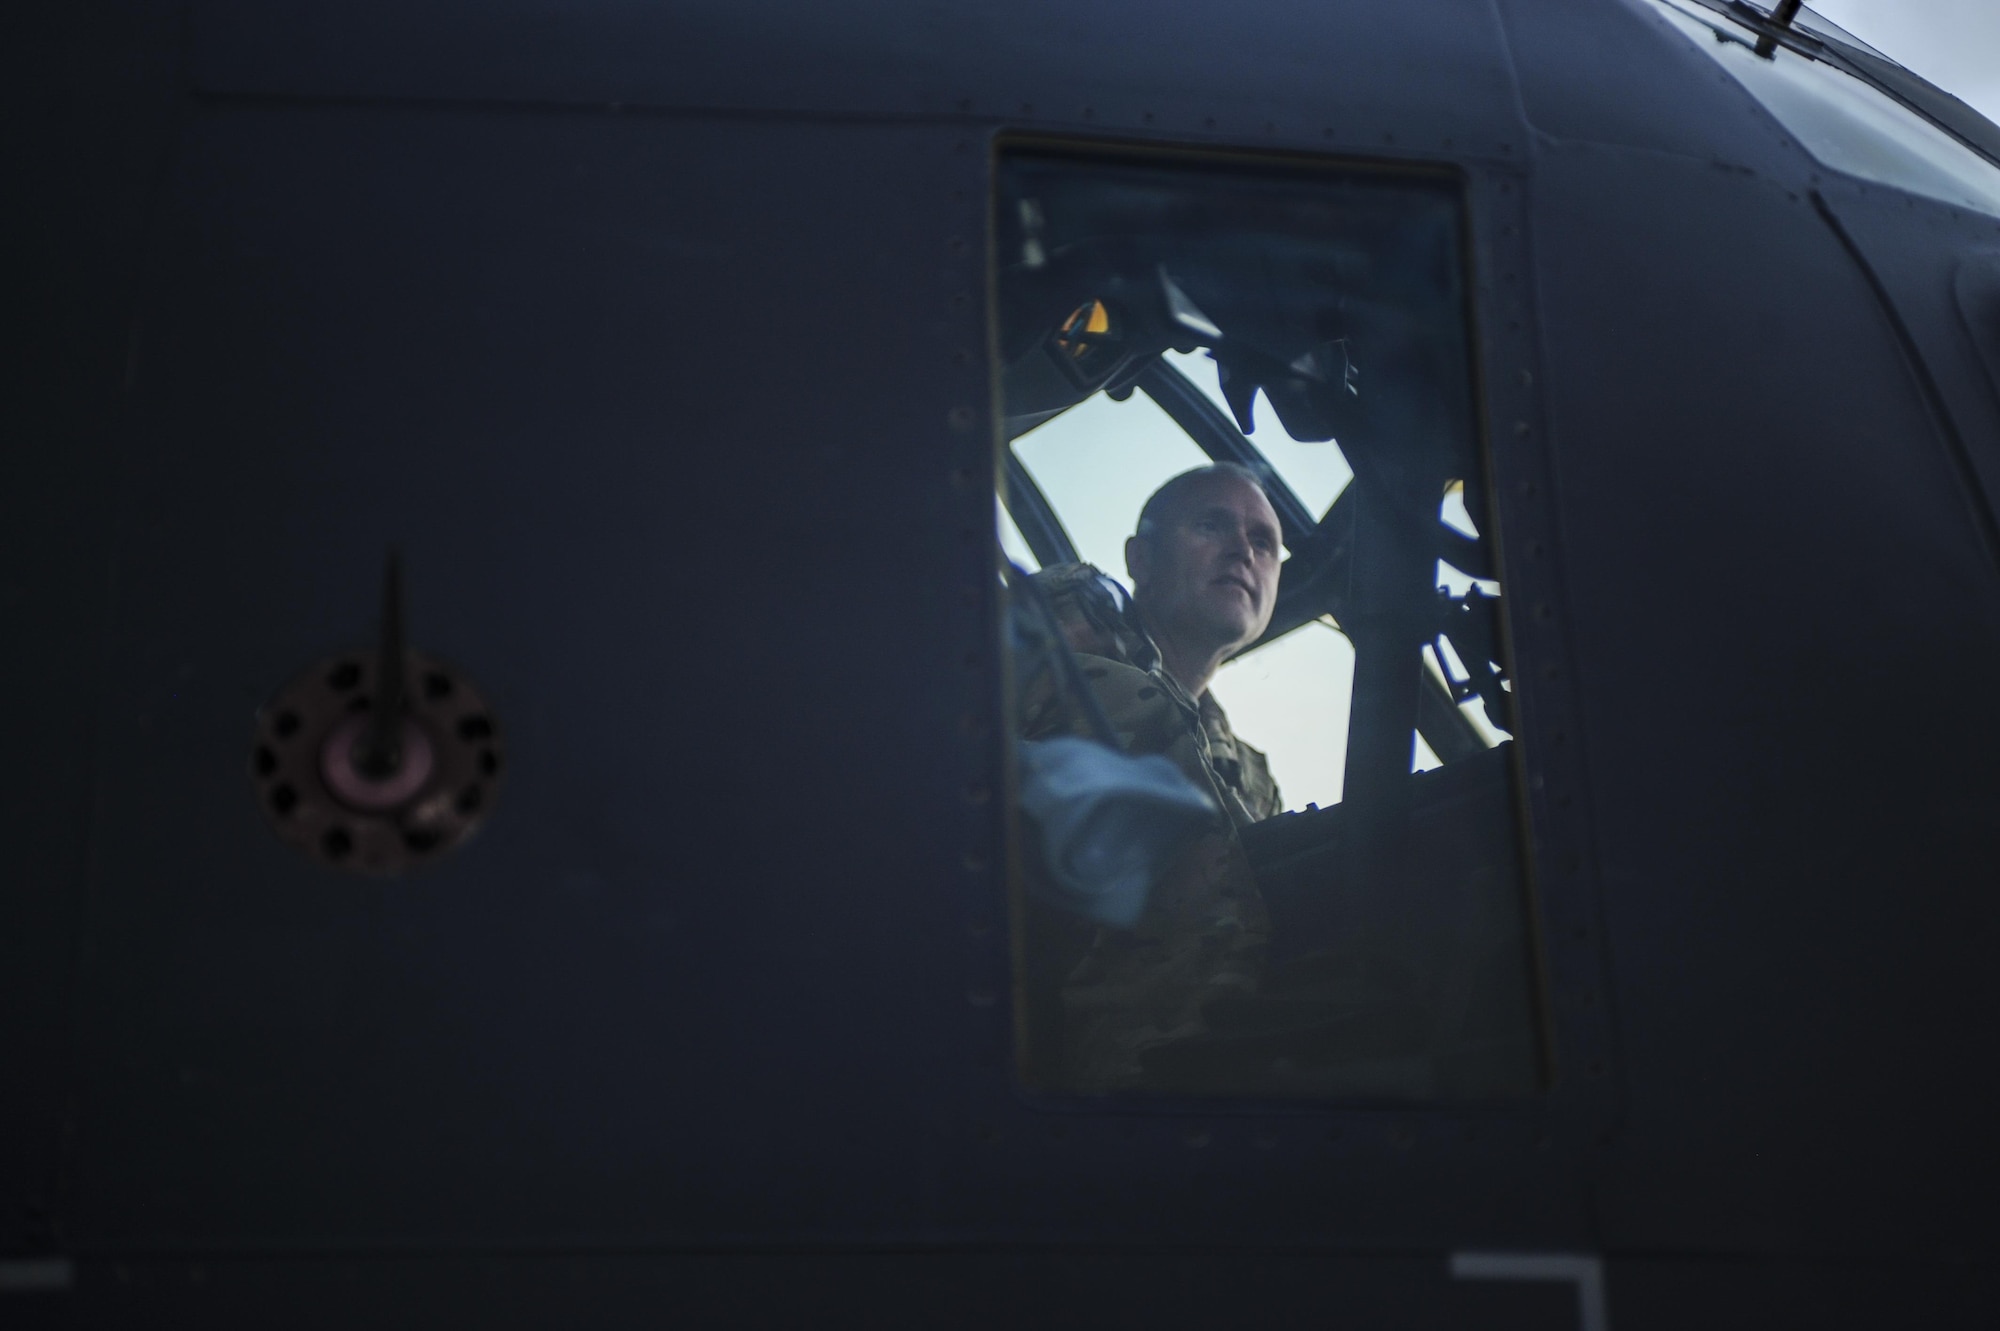 An Airman, assigned to the 71st Rescue Squadron, Moody Air Force Base, Georgia, prepares the cockpit of a HC-130J Combat King II for Red Flag 16-4 at Nellis Air Force Base, Nev., Aug. 25, 2016. Red Flag is a realistic combat training exercise involving the air, space and cyber forces of the U.S. (U.S. Air Force photo by Airman 1st Class Kevin Tanenbaum/Released)